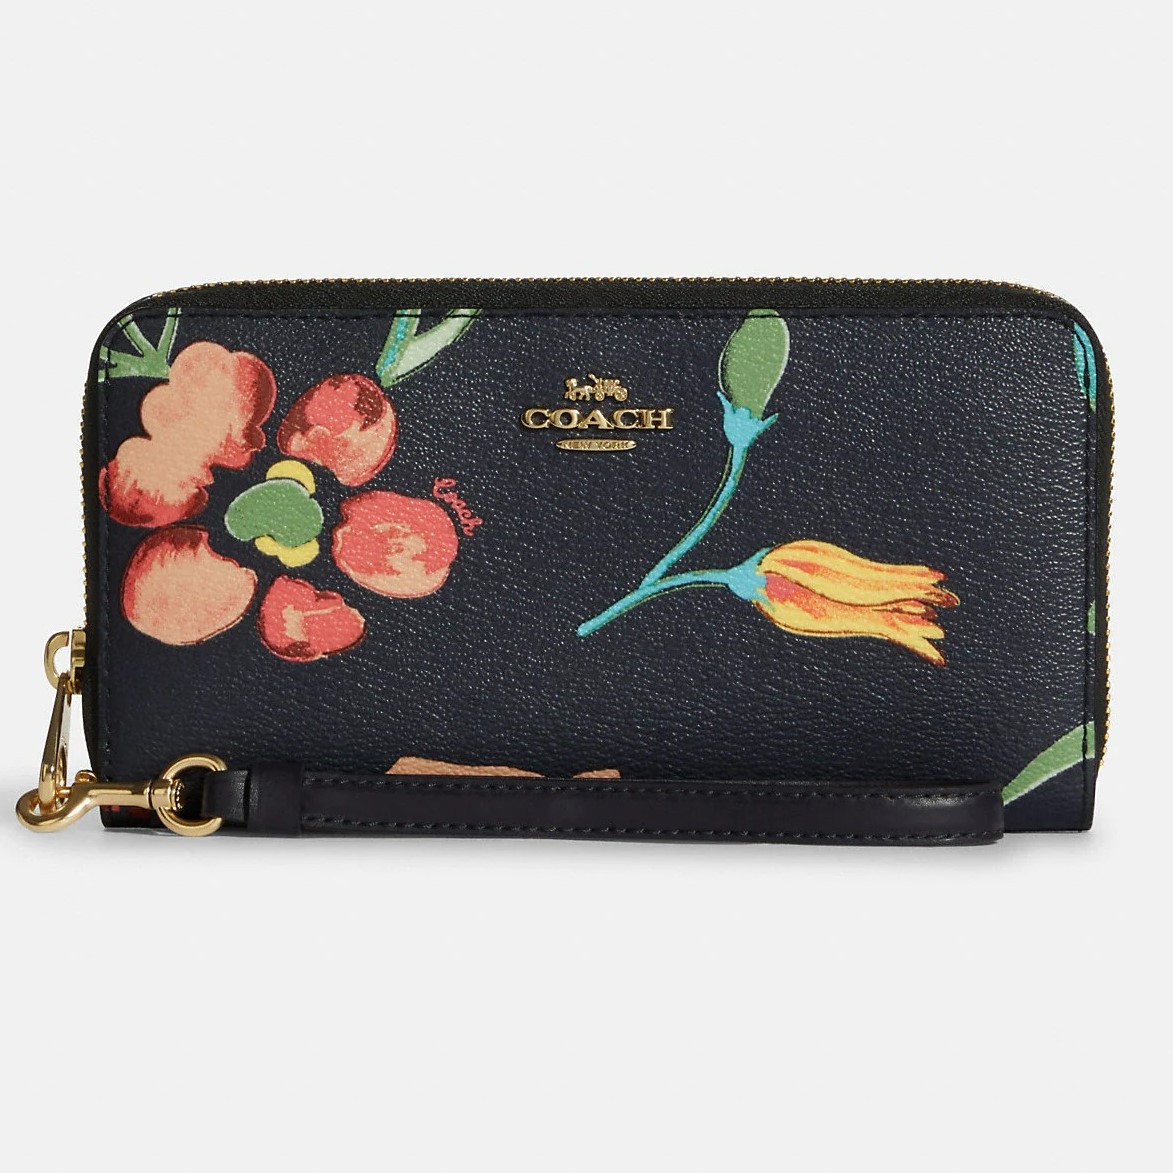 VÍ NỮ DÀI COACH LONG ZIP AROUND WALLET WITH DREAMY LAND FLORAL PRINT 2